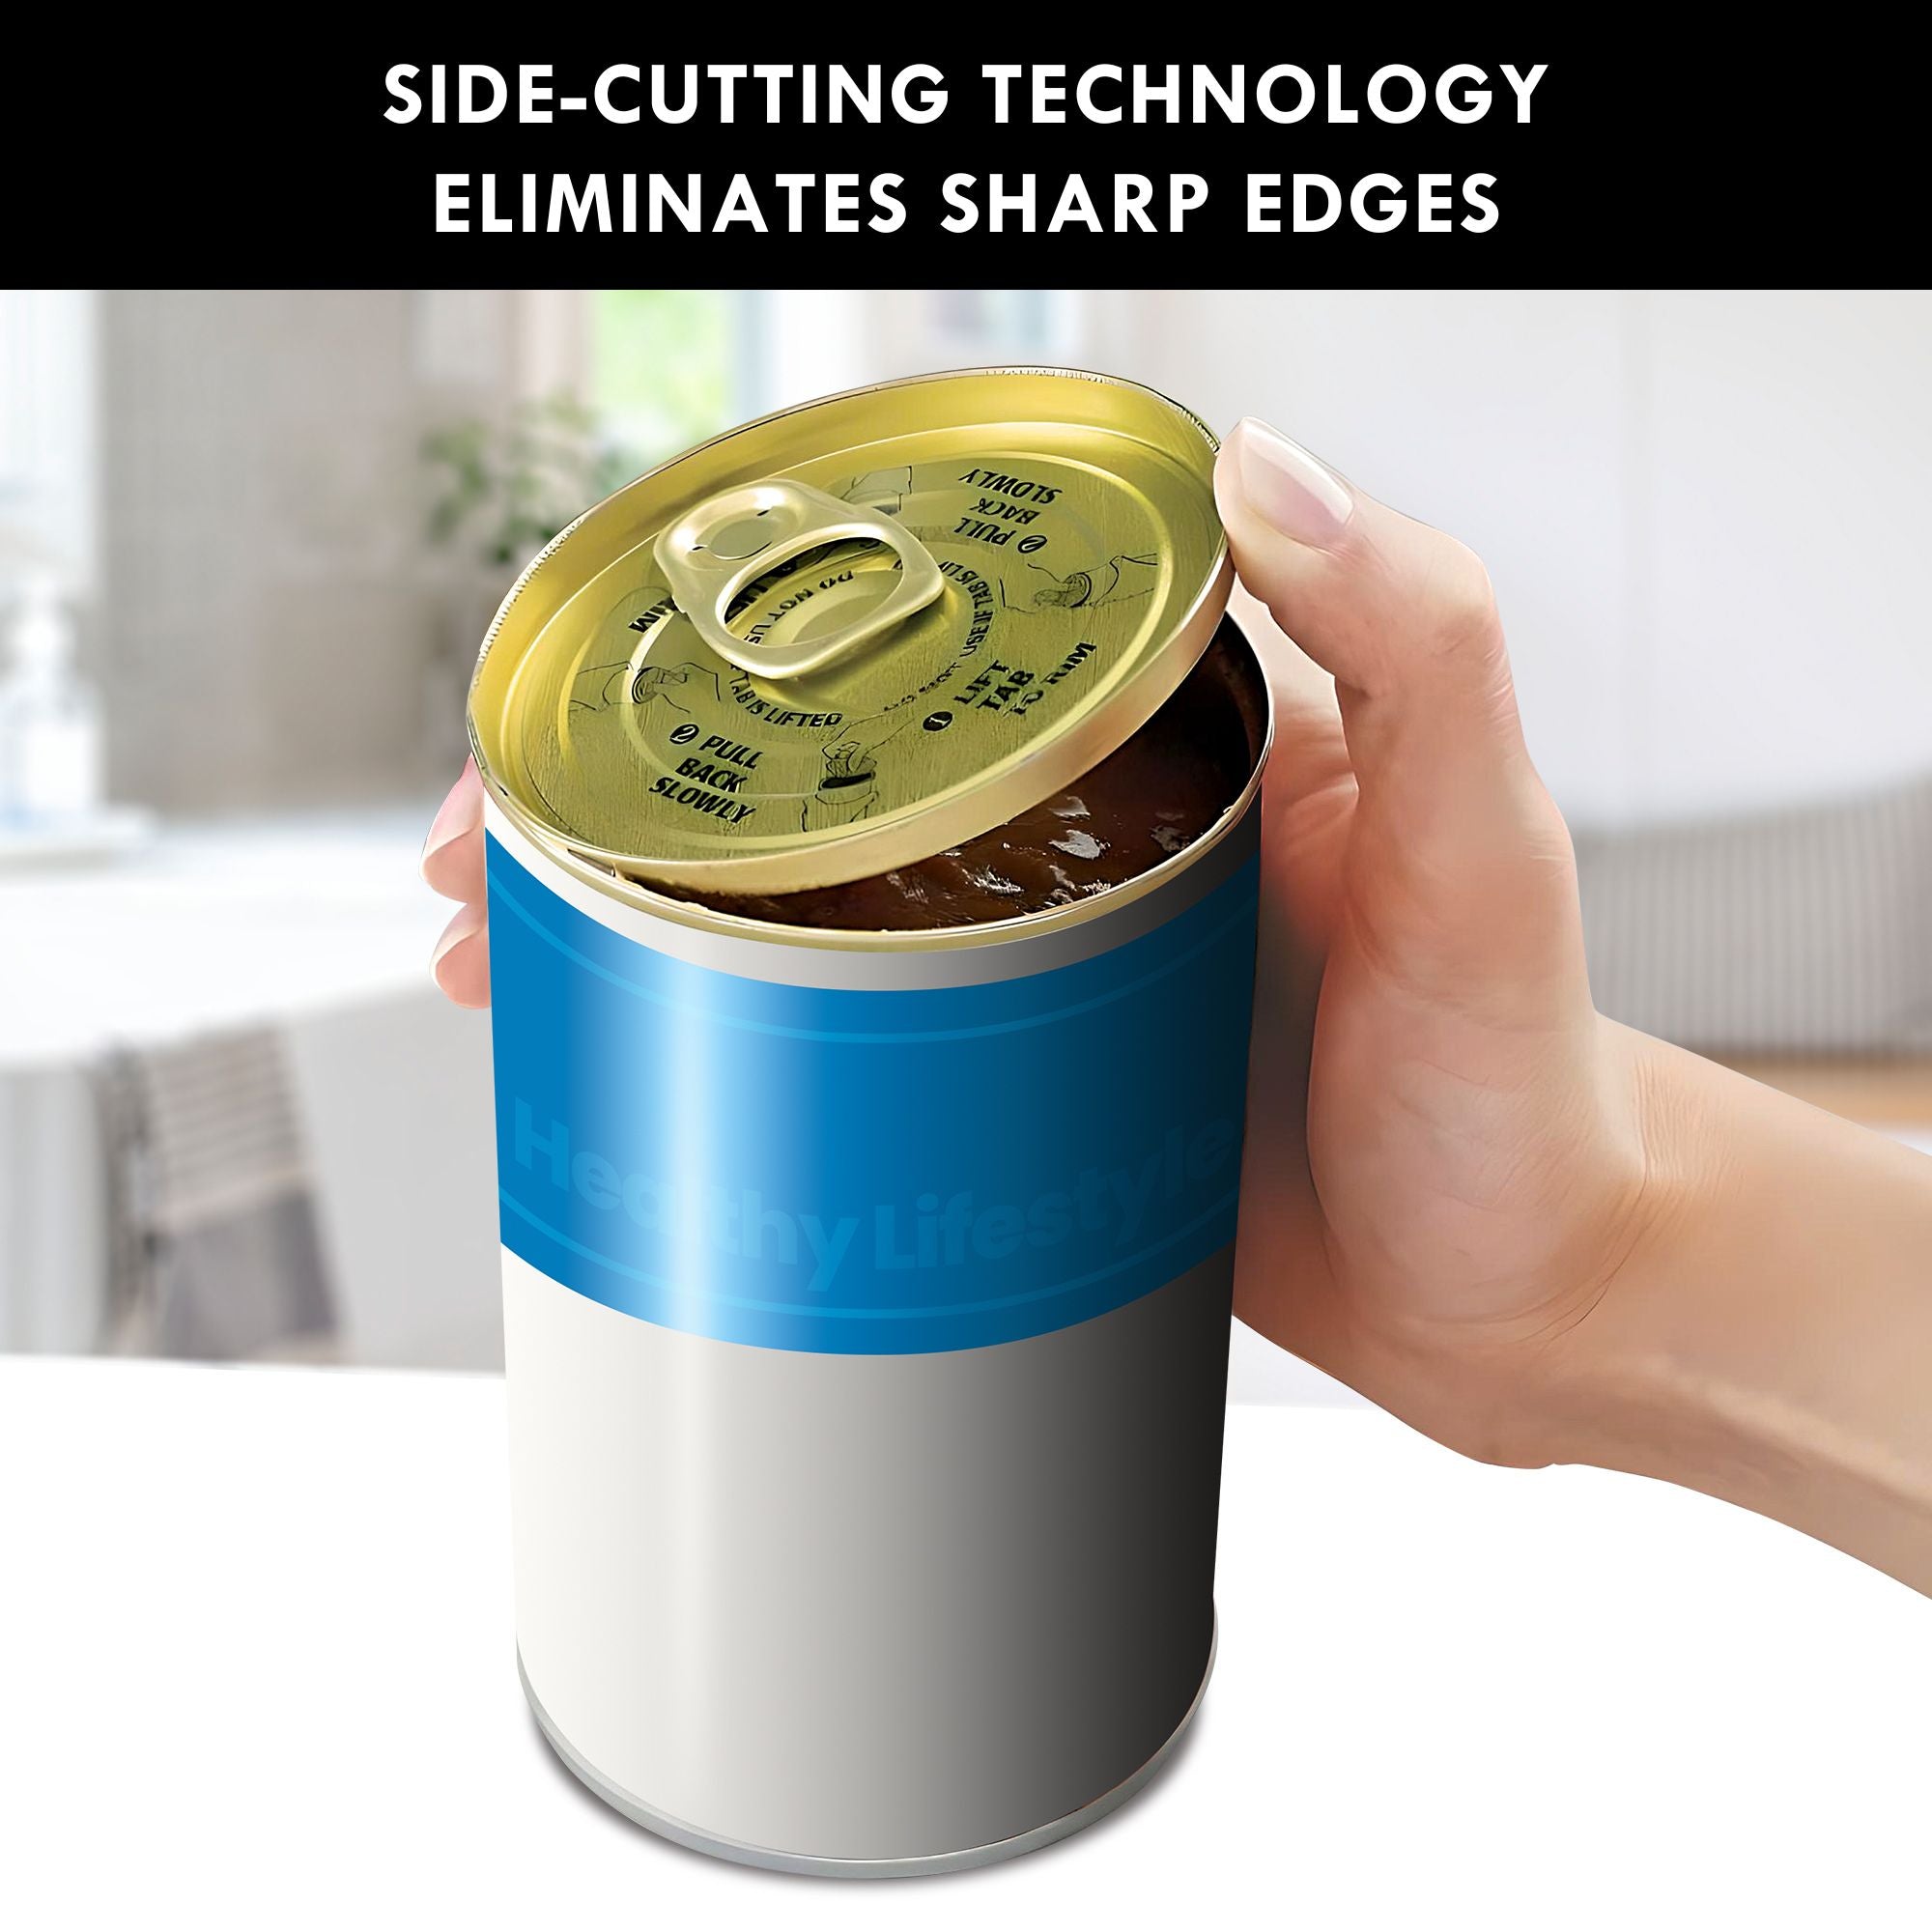 A person's hand holding an opened can with their thumb touching the smooth edge of the lid. Text above reads, "Side-cutting technology eliminates sharp edges"